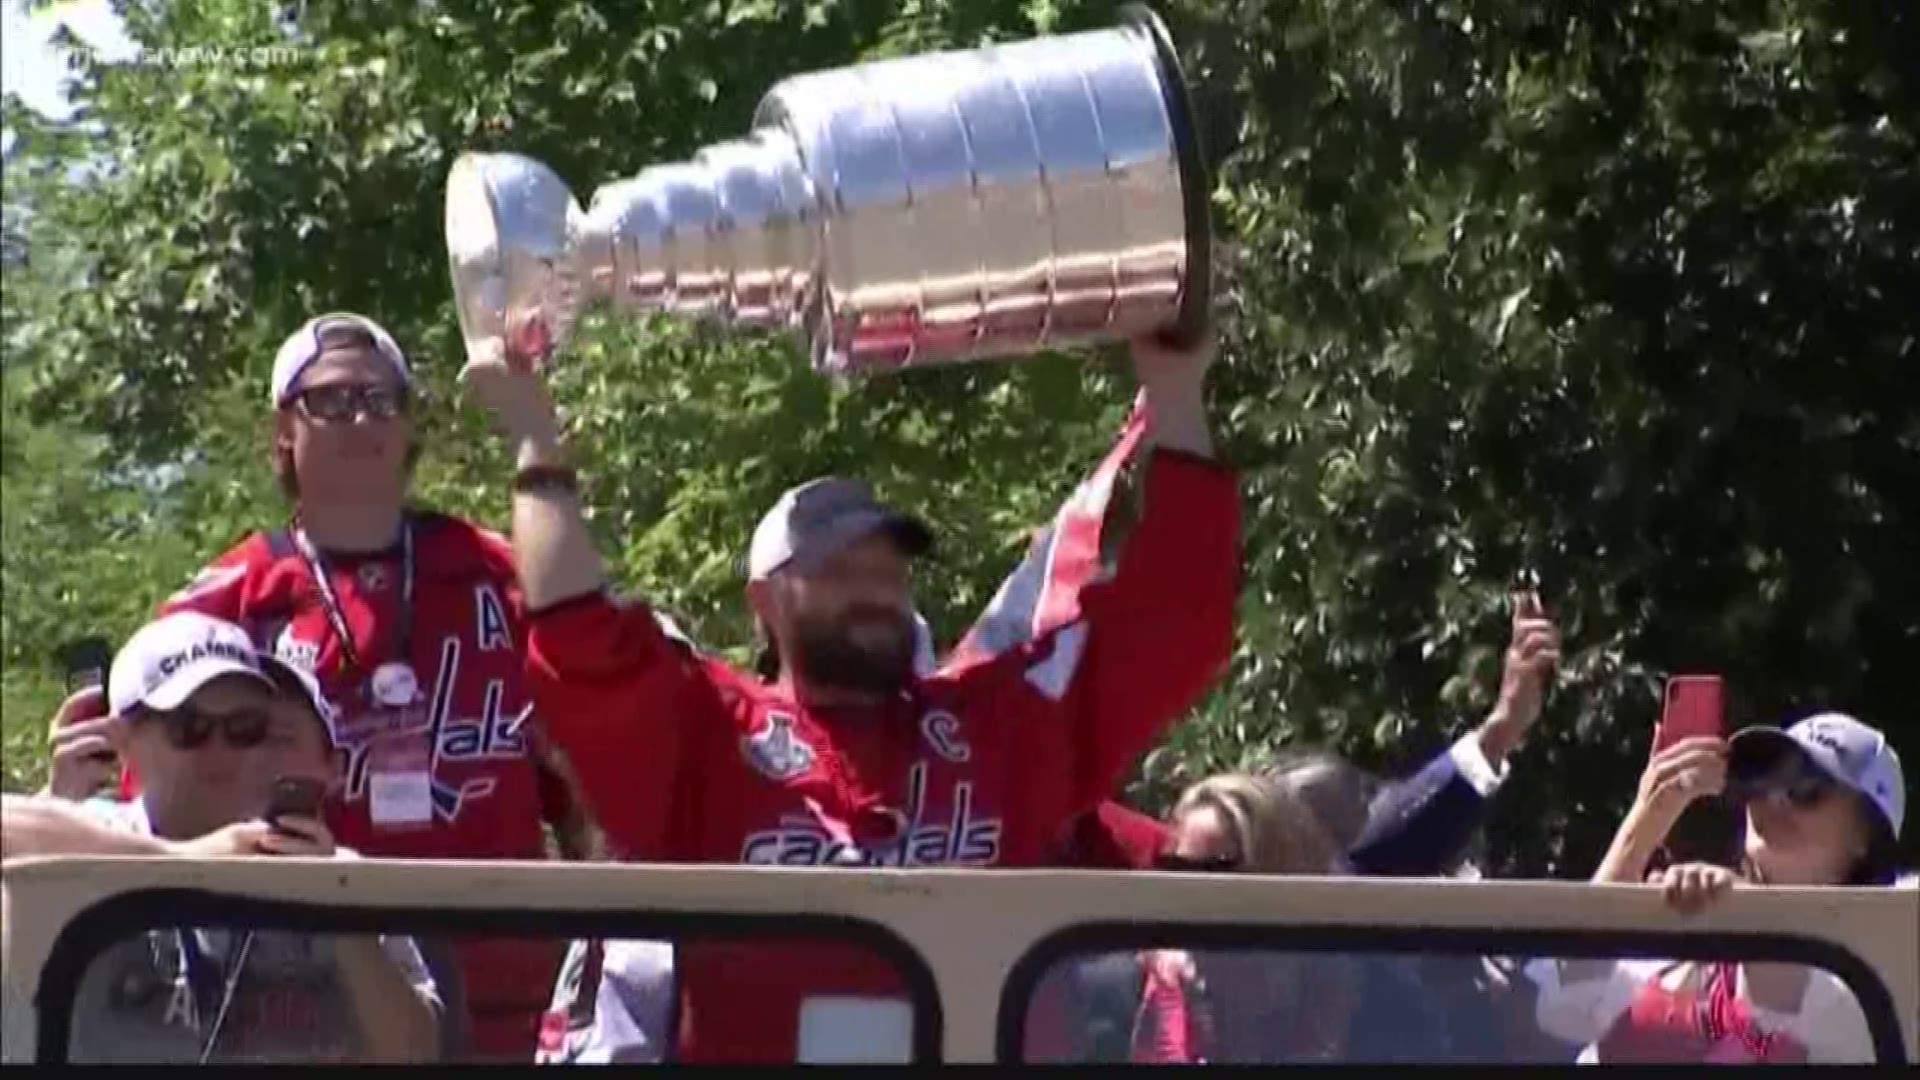 Showing off their Stanley Cup, the Washington Capitals celebrated with their fans in their first ever championship parade in D.C.